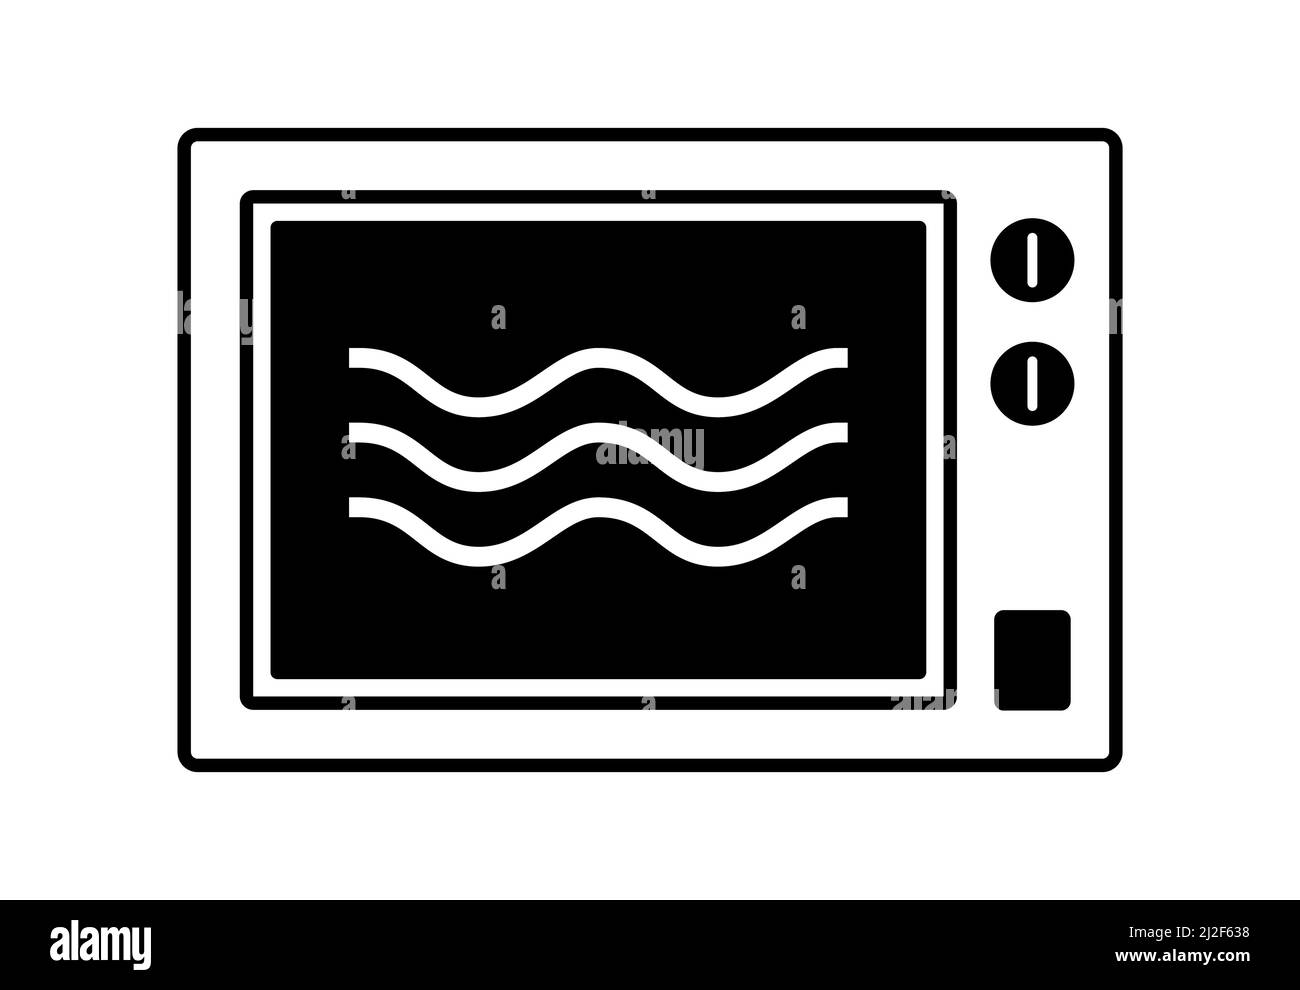 Kitchen microwave oven food preparation symbol vector illustration icons Stock Vector